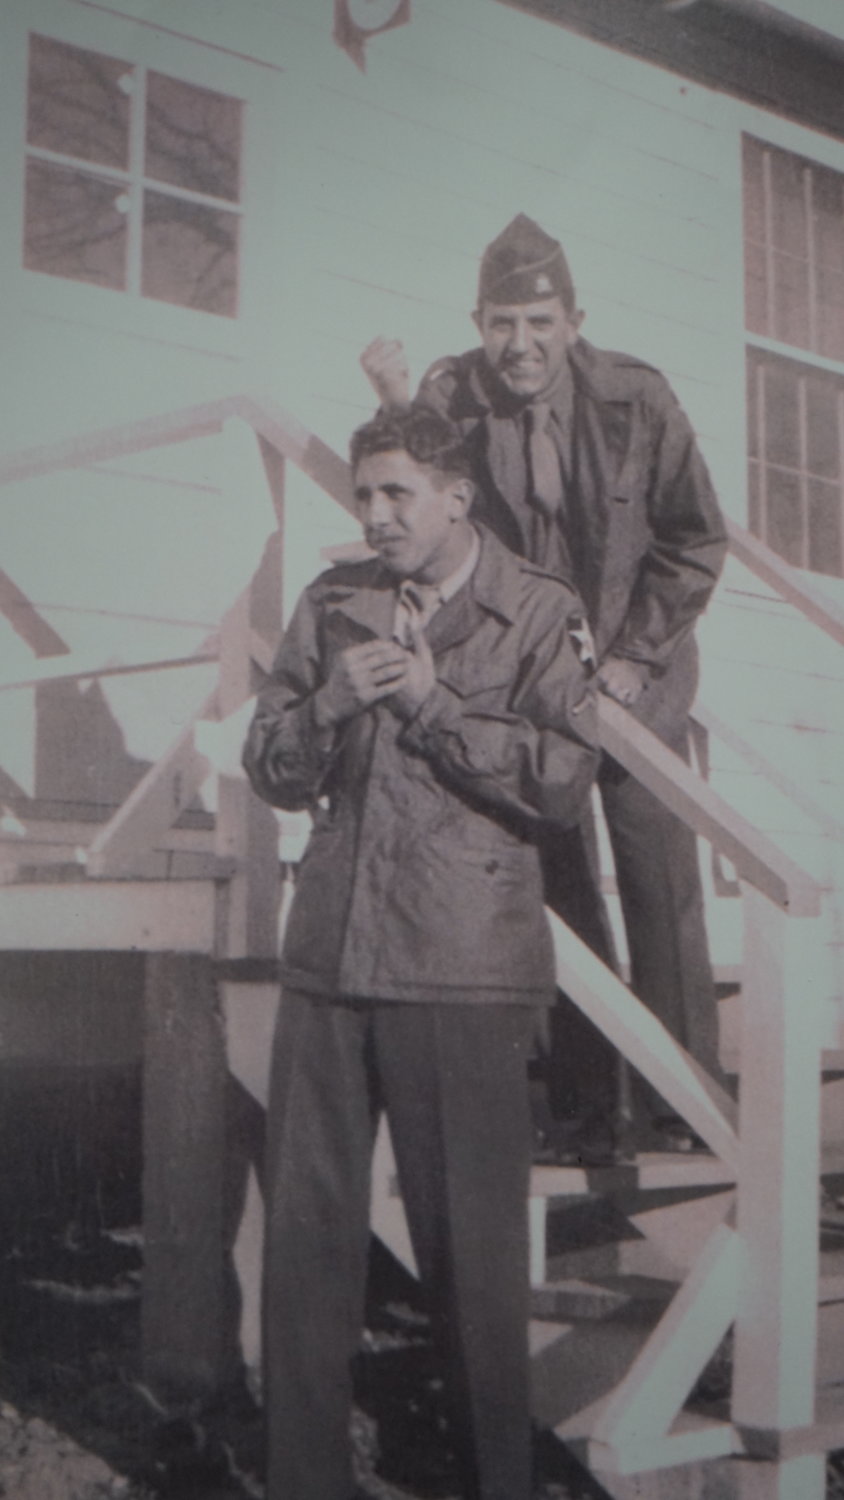 Palermo, left, in 1945. He was the last living World War II veteran in Valley Stream known to have taken part in the D-Day invasion.